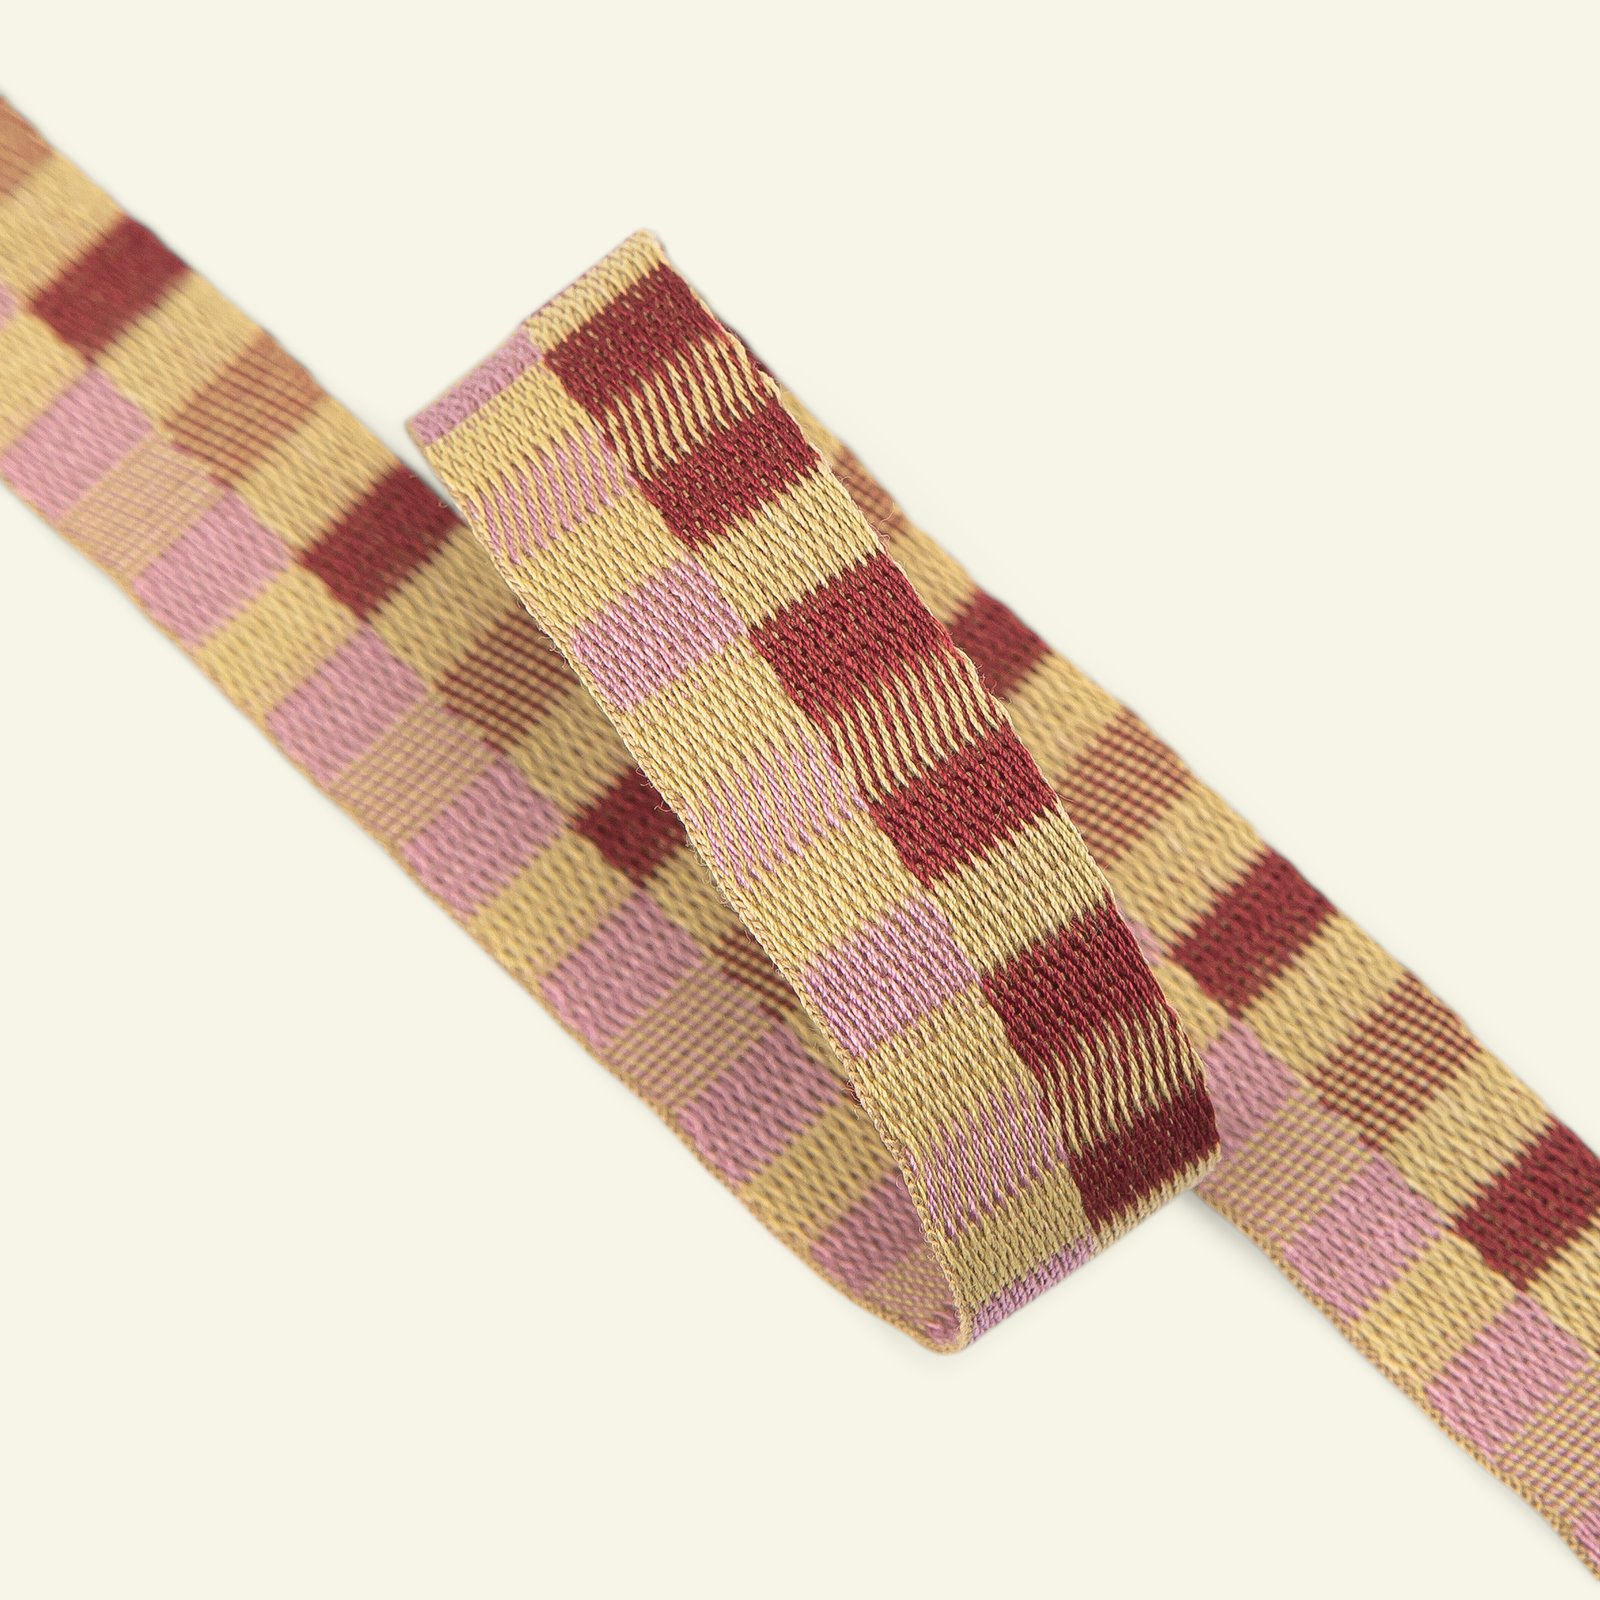 Ribbon check woven 20mm olive/red/p. 2m 22399_pack